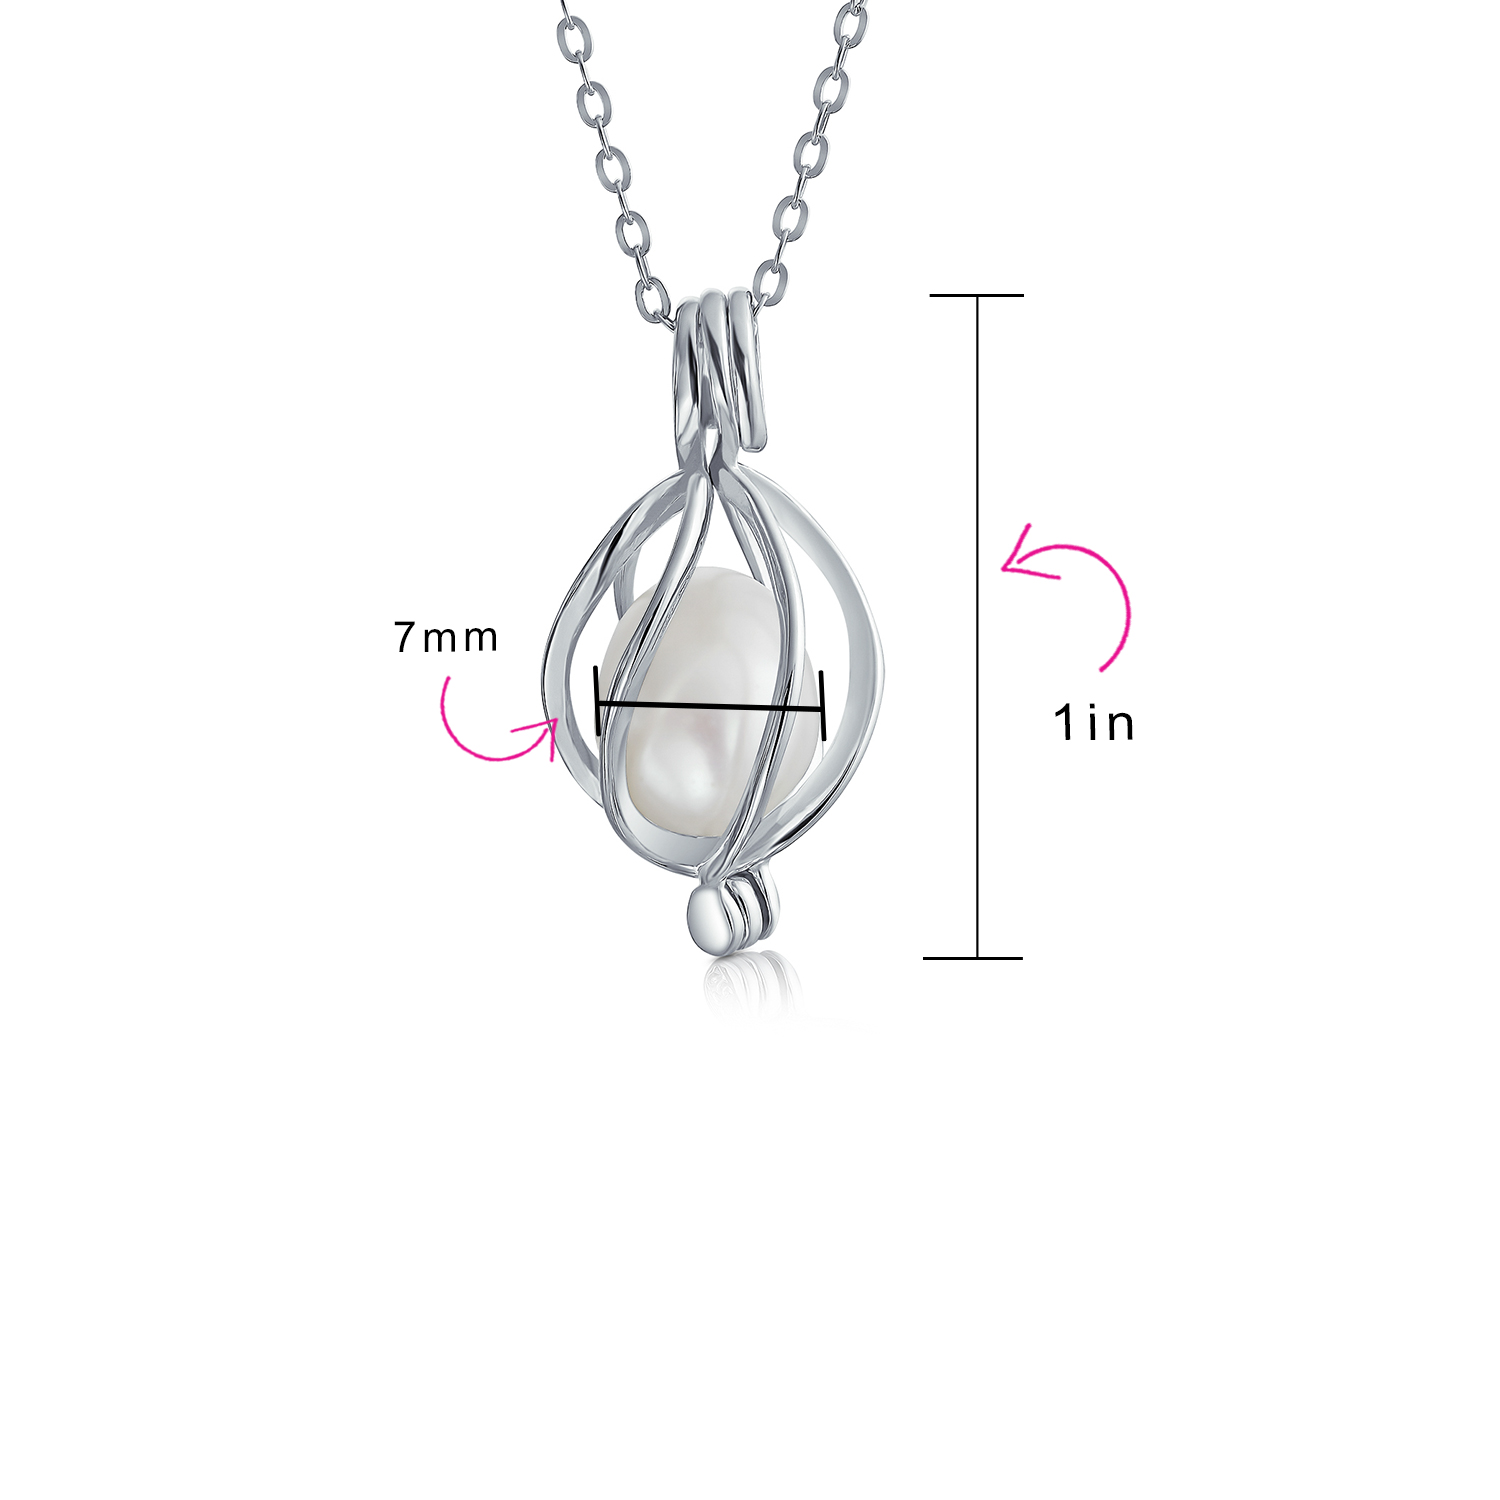 Bling Jewelry Drop Pendant White Freshwater Cultured Pearl Caged Sterling Silver 18" - image 3 of 4